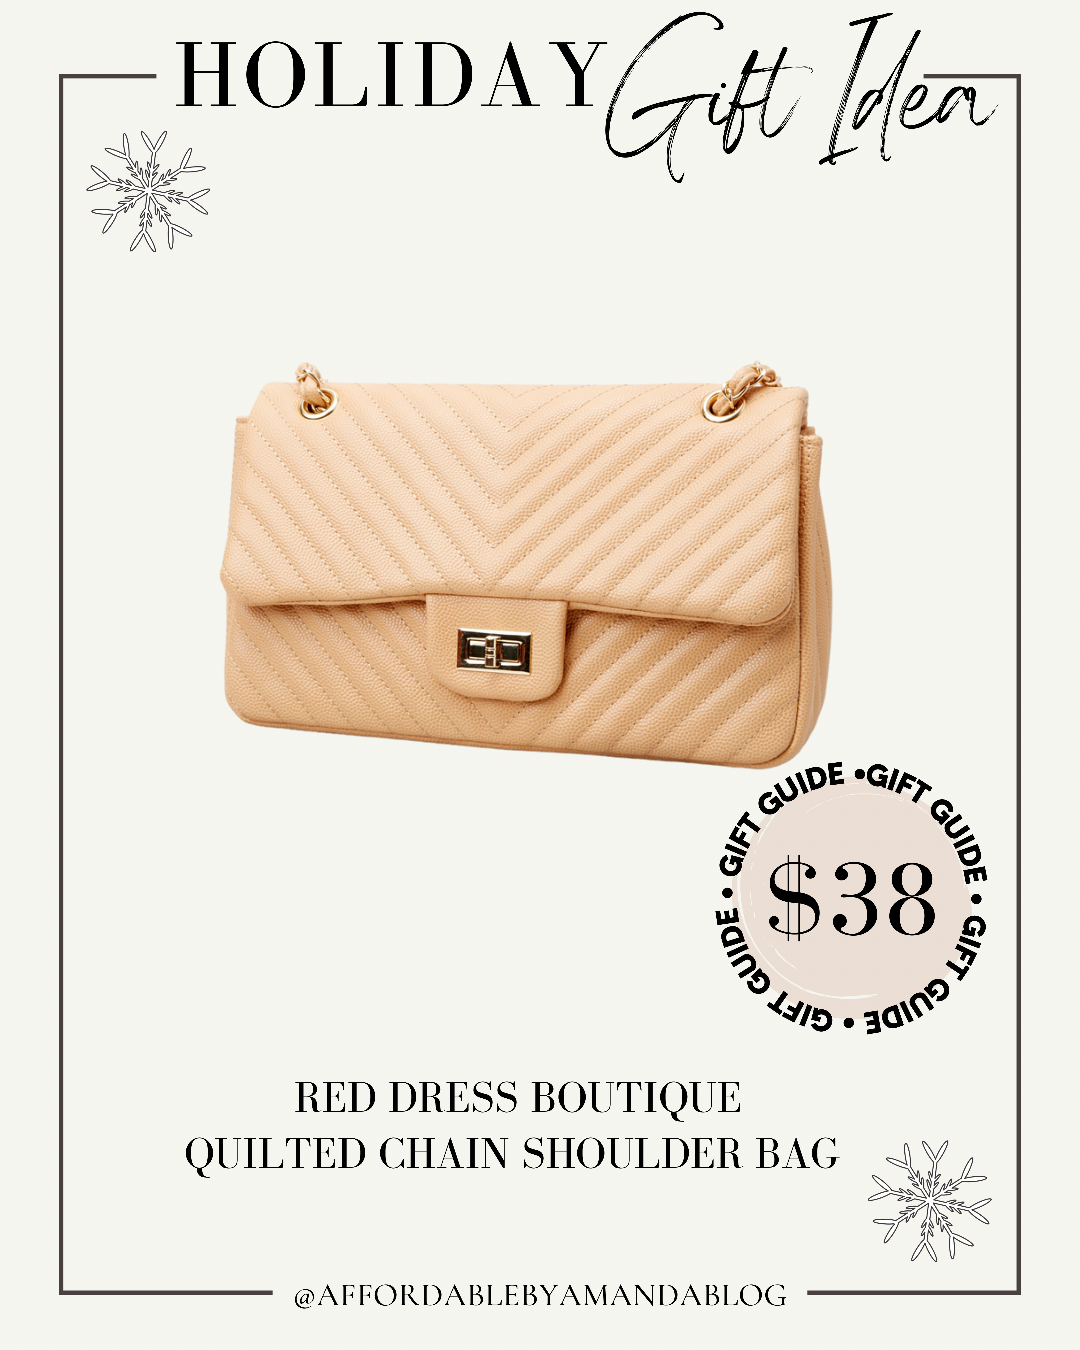 Gifts Under $100. Red Dress Boutique Fashion Babe Nude Bag - Affordable by Amanda